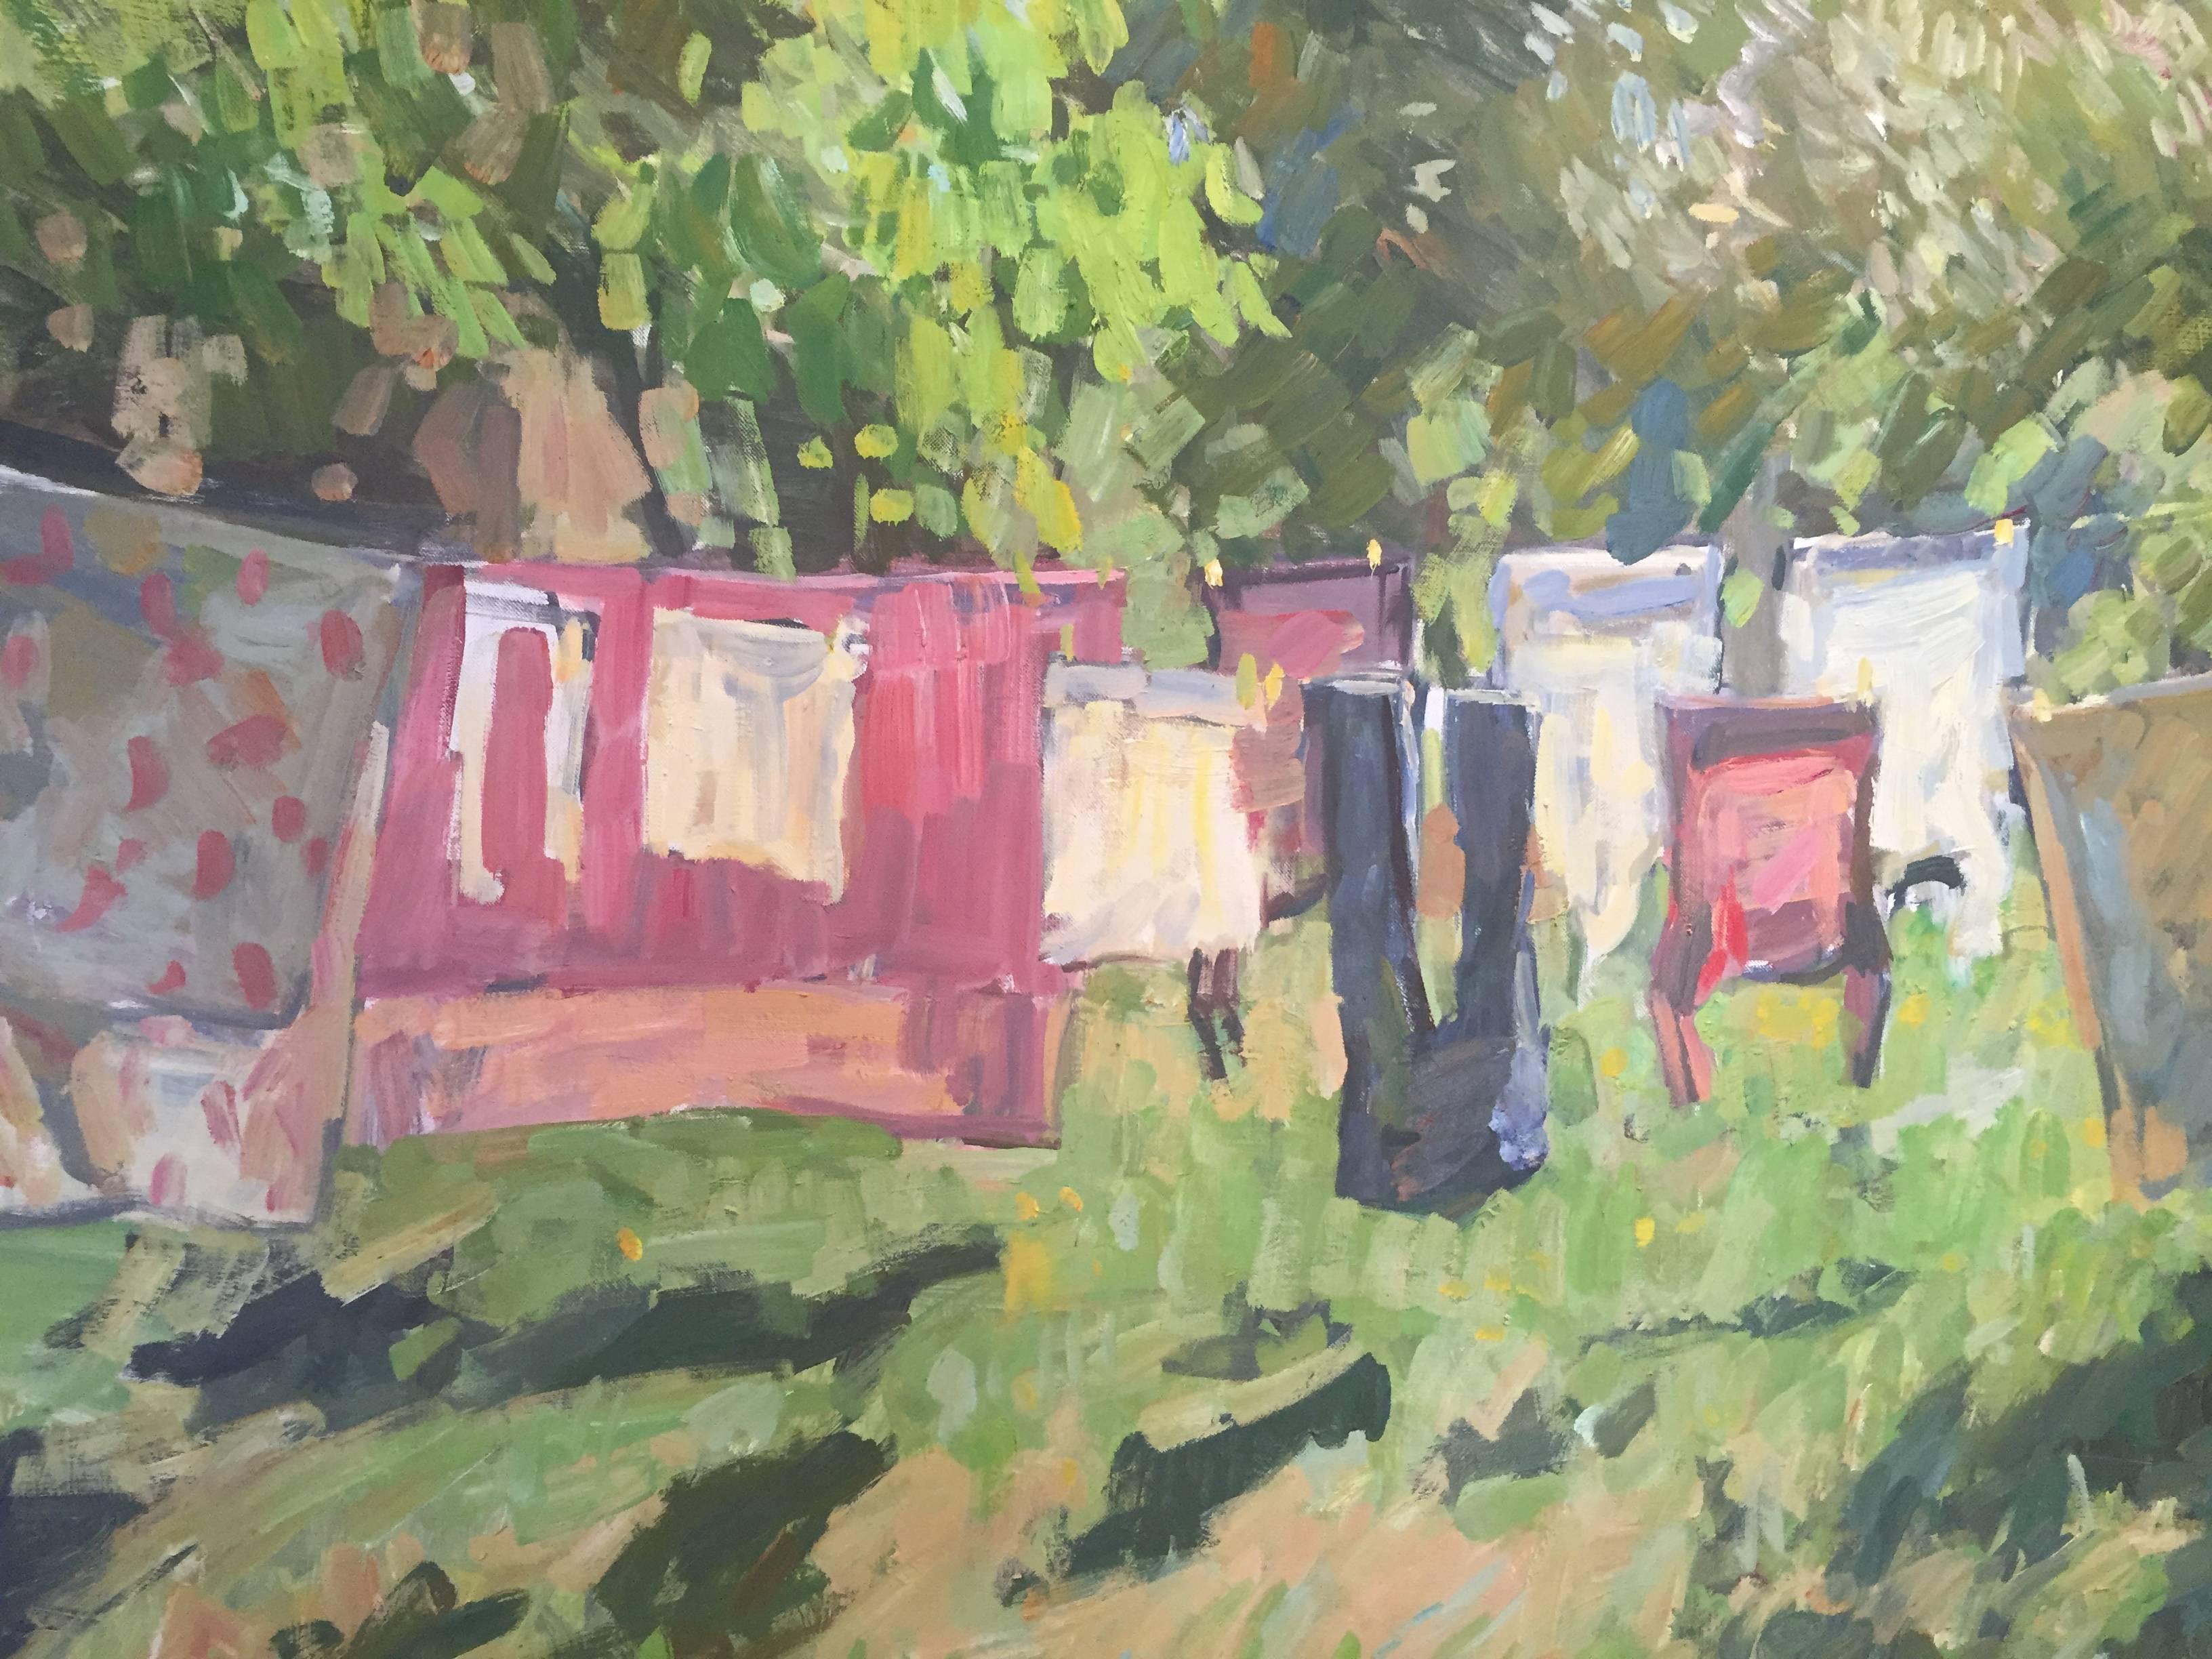 Laundry on the Line 1